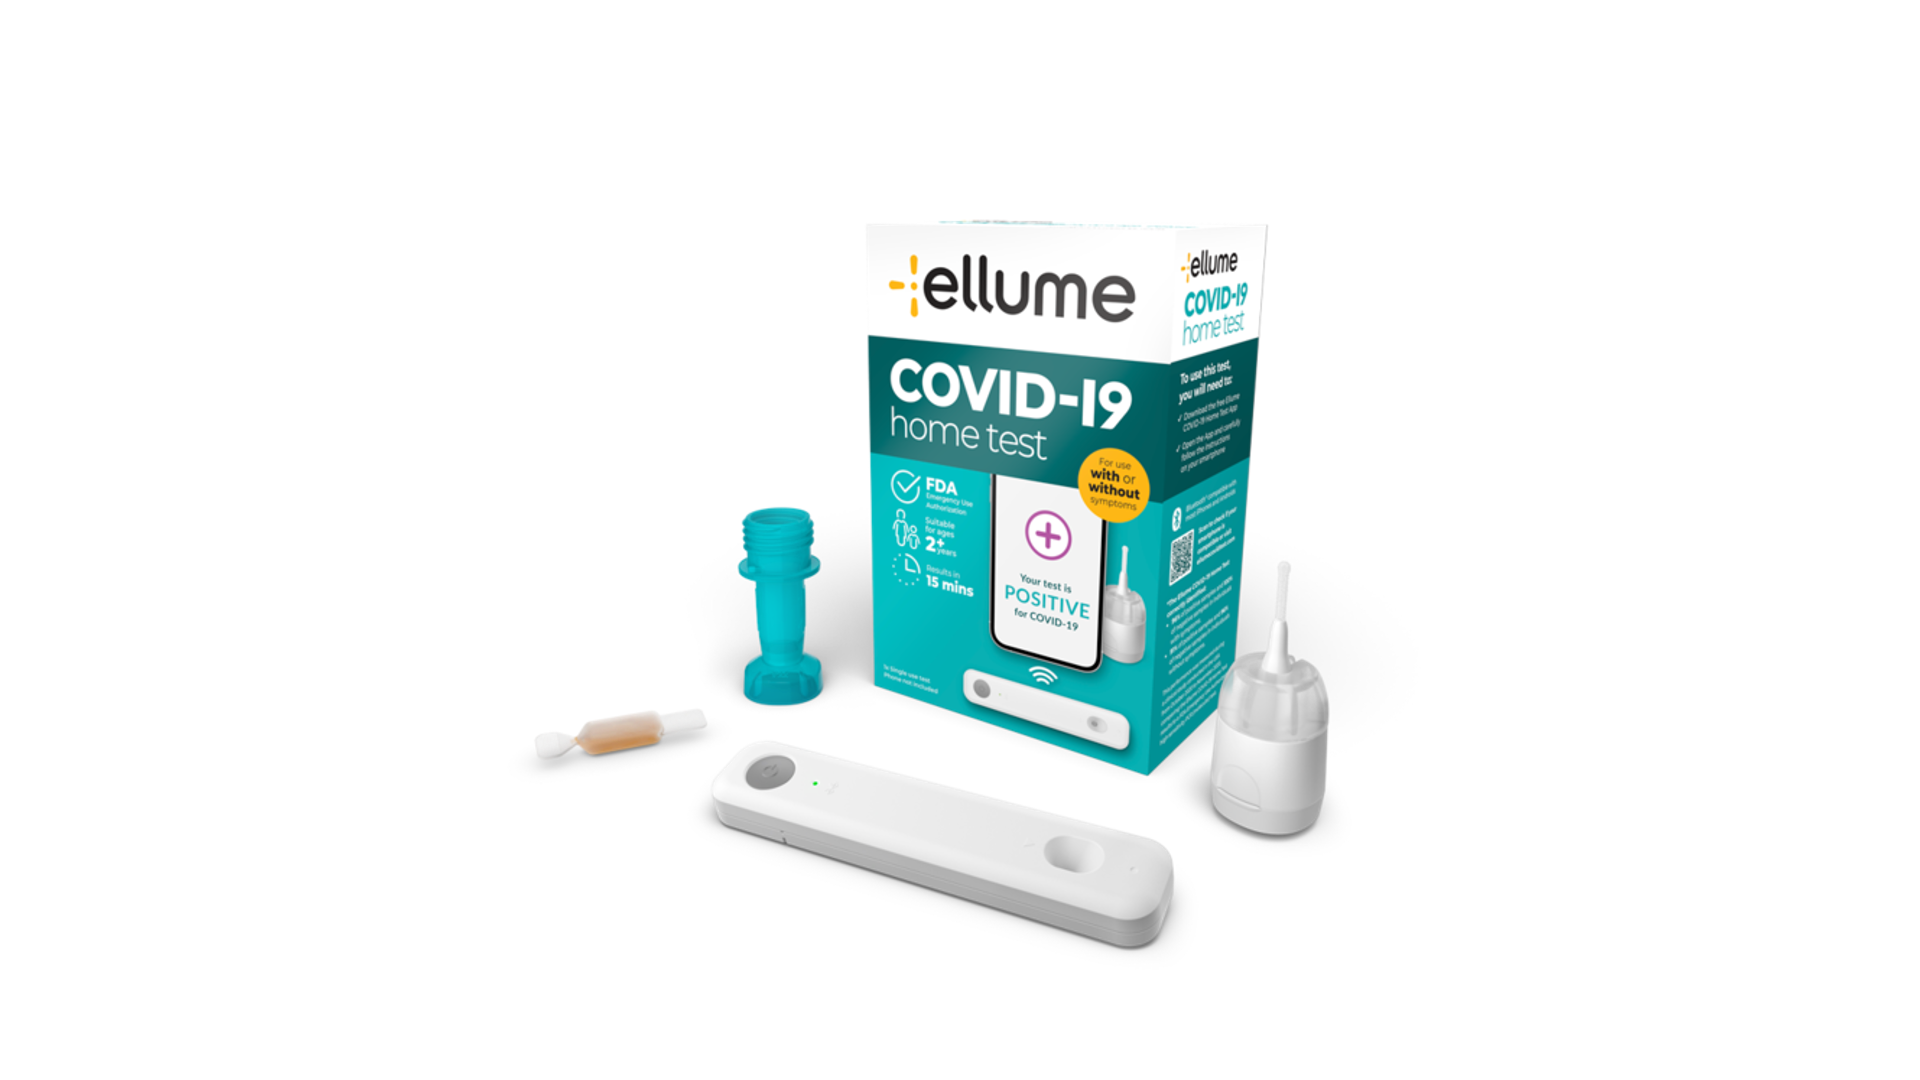 Ellume’s rapid COVID-19 home test provides accurate results within 15 minutes